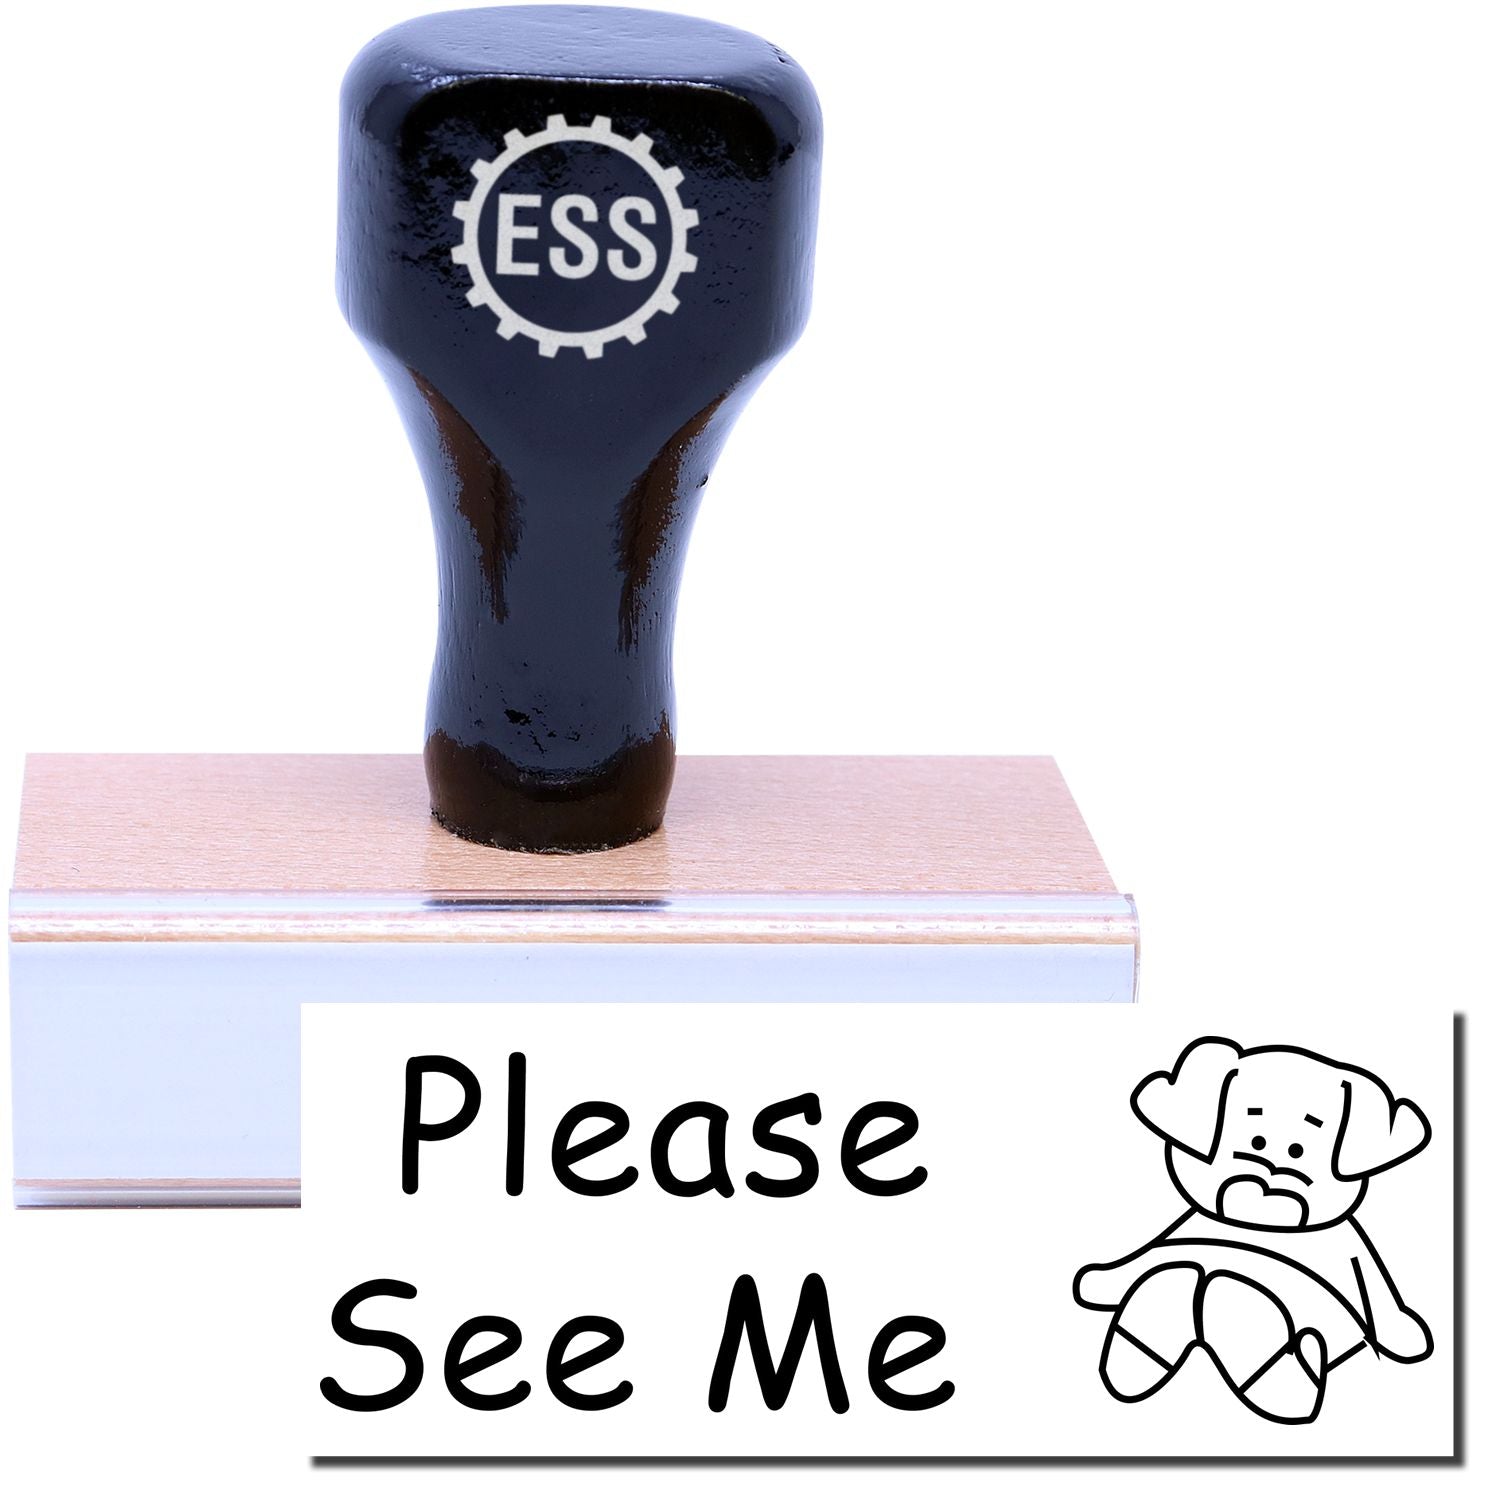 A stock office rubber stamp with a stamped image showing how the text "Please See Me" with a small image of a dog on the right side is displayed after stamping.